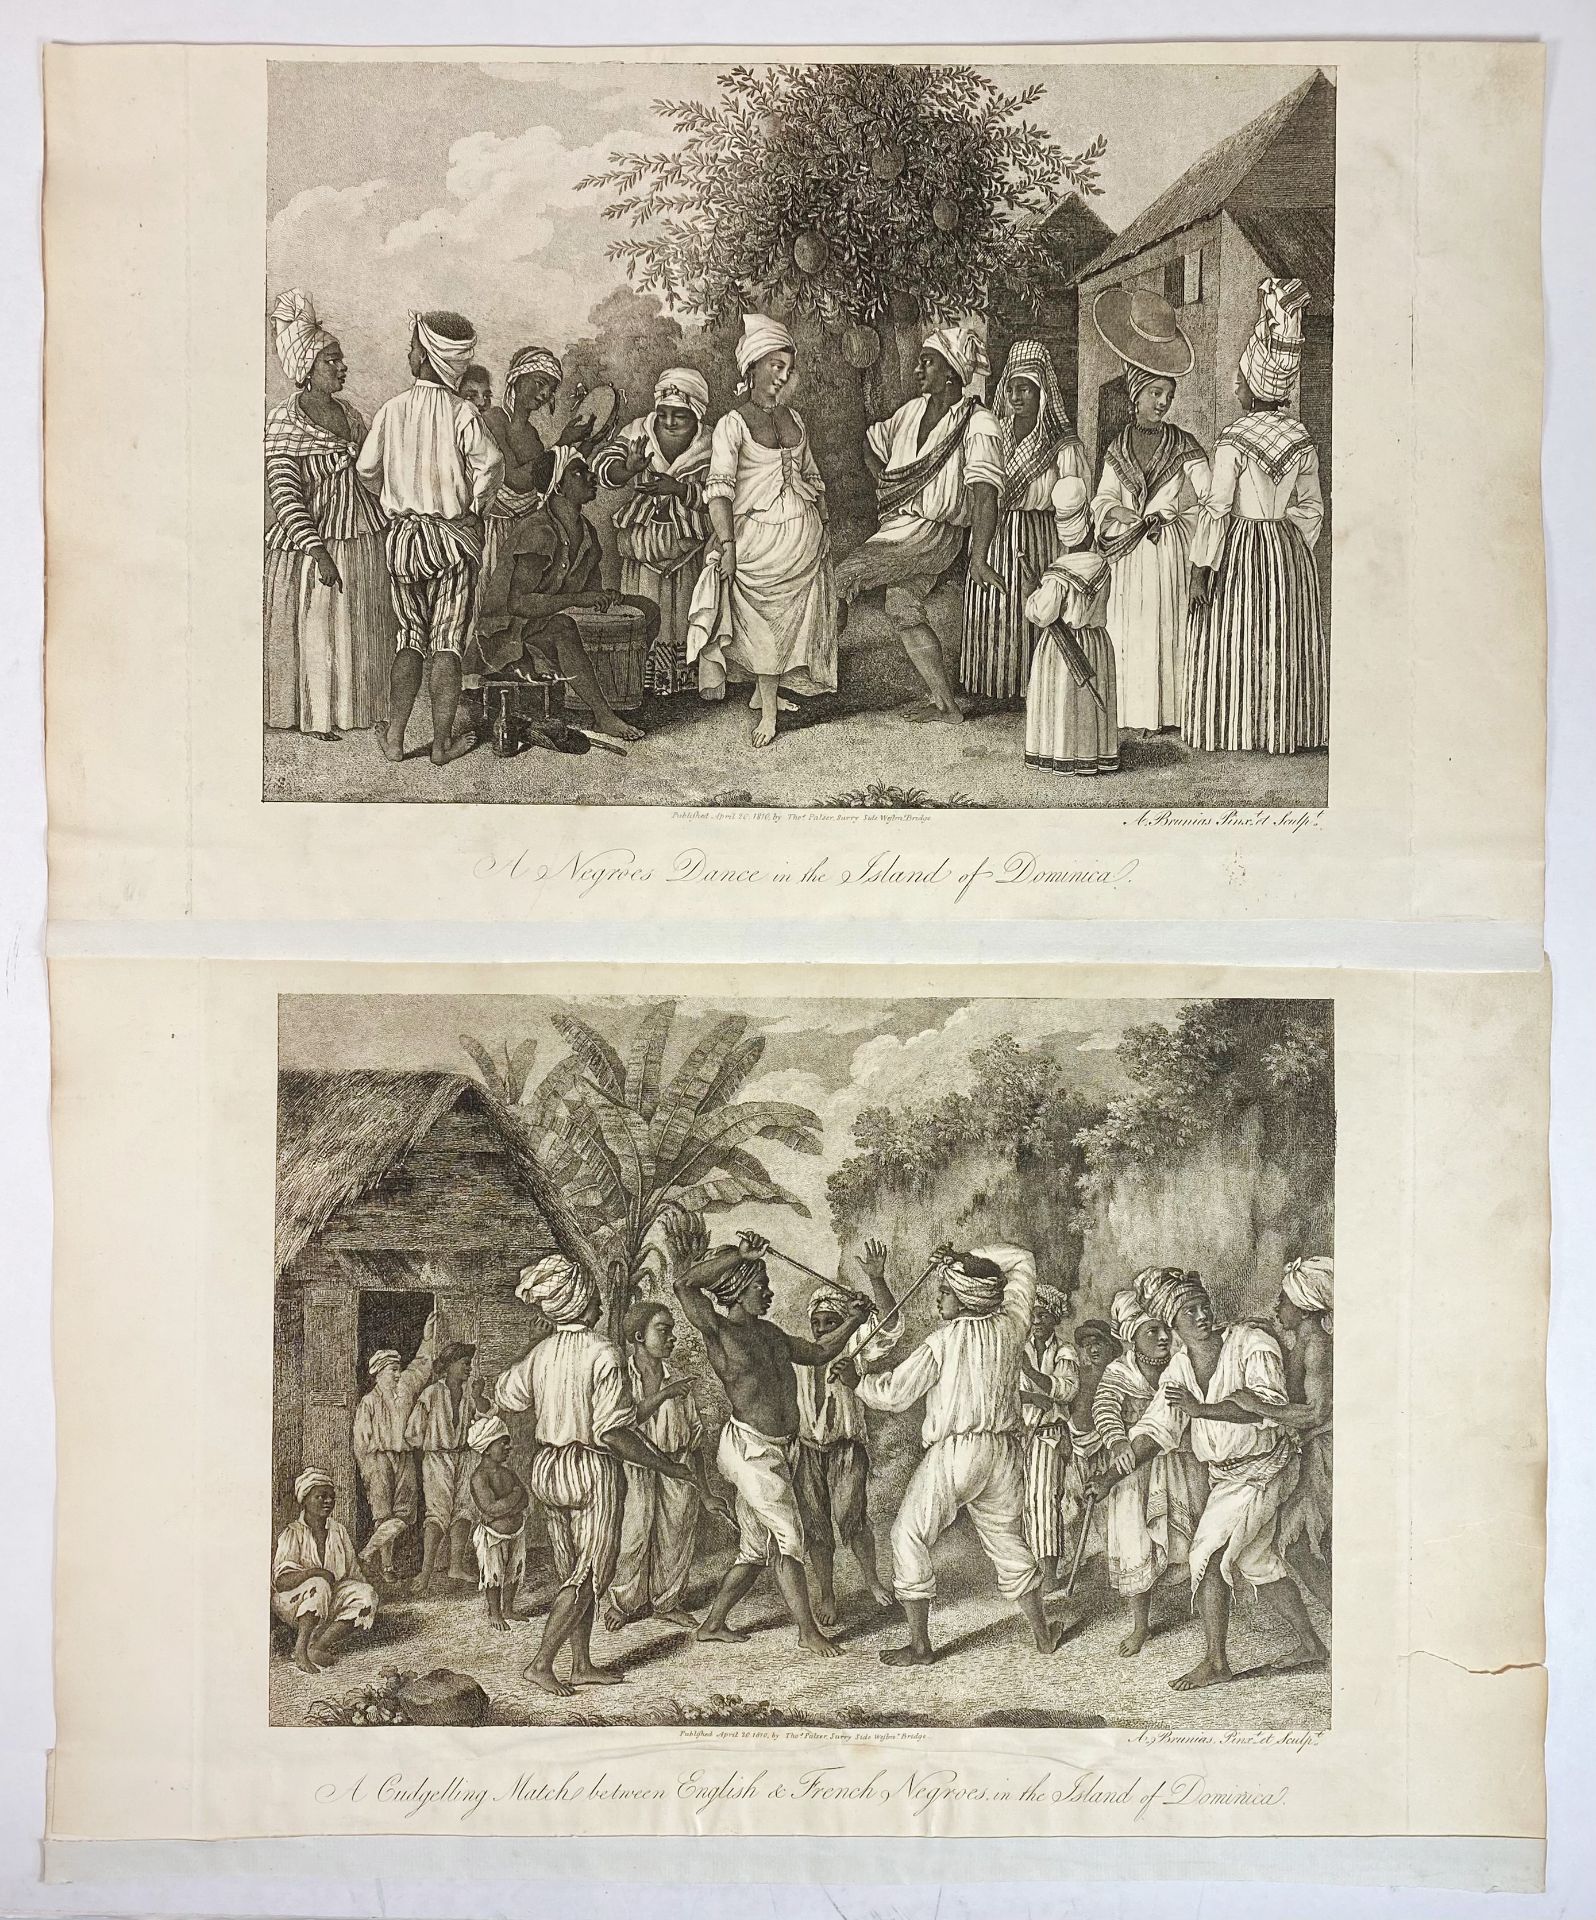 SLAVERY - ABOLITIONISM -- "A NEGROES DANCE in the Island of St. Dominica". Lond